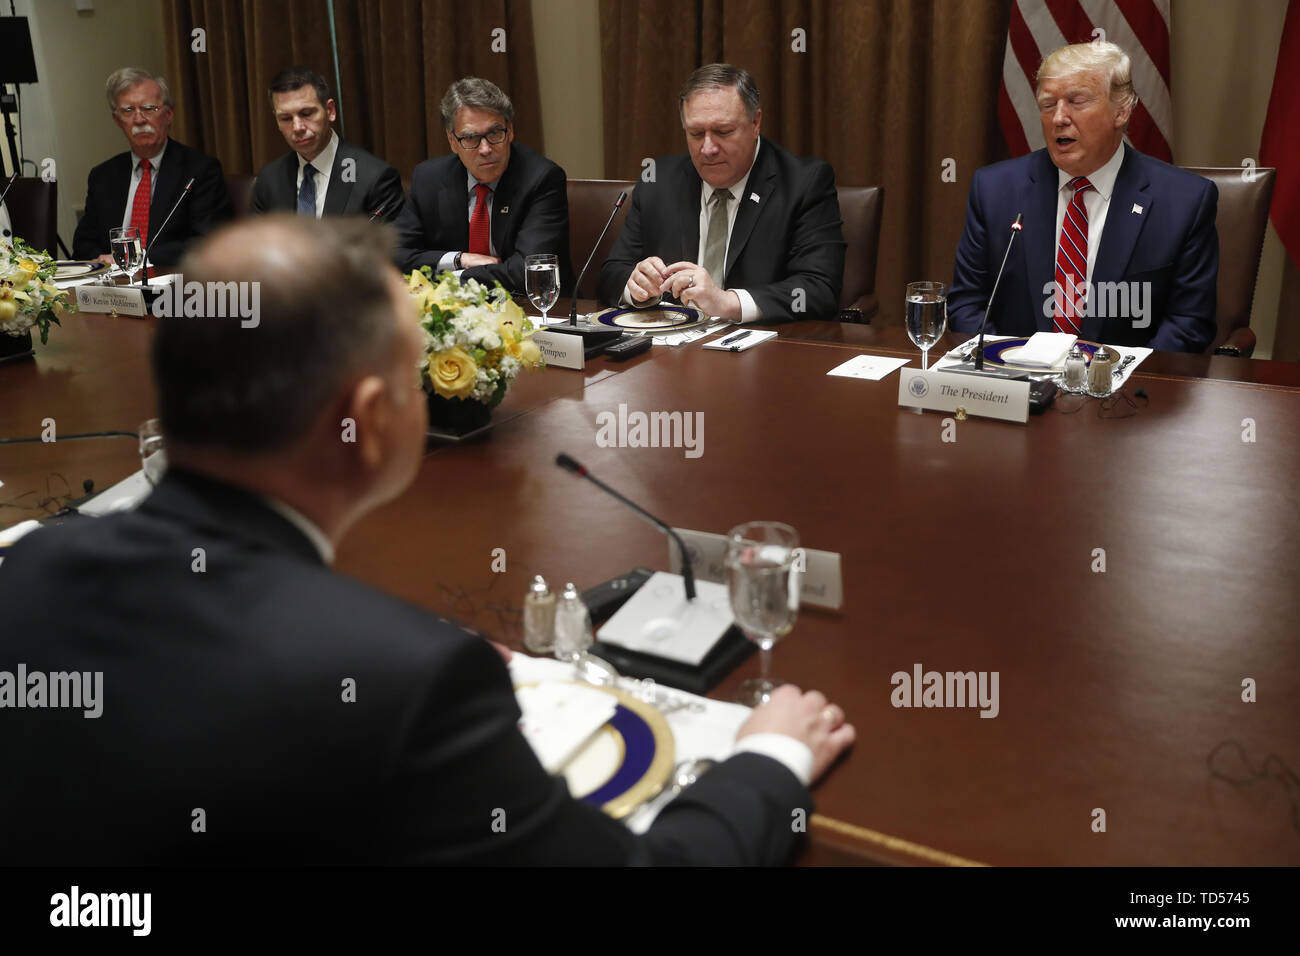 Polish President Andrzej Duda (B) and (L-R) US National Security Advisor John, Bolton, Acting US Secretary of Homeland Security Kevin McAleenan, US Secretary of Energy Rick Perry, US Secretary of State Mike Pompeo and US President Donald J. Trump during a luncheon in the cabinet room of the White House in Washington, DC, USA, 12 June 2019. Later in the day President Trump and President Duda will participate in a signing ceremony to increase military to military cooperation including the purchase of F-35 fighter jets and an increased US troop presence in Poland. Credit: Shawn Thew/Pool via Stock Photo